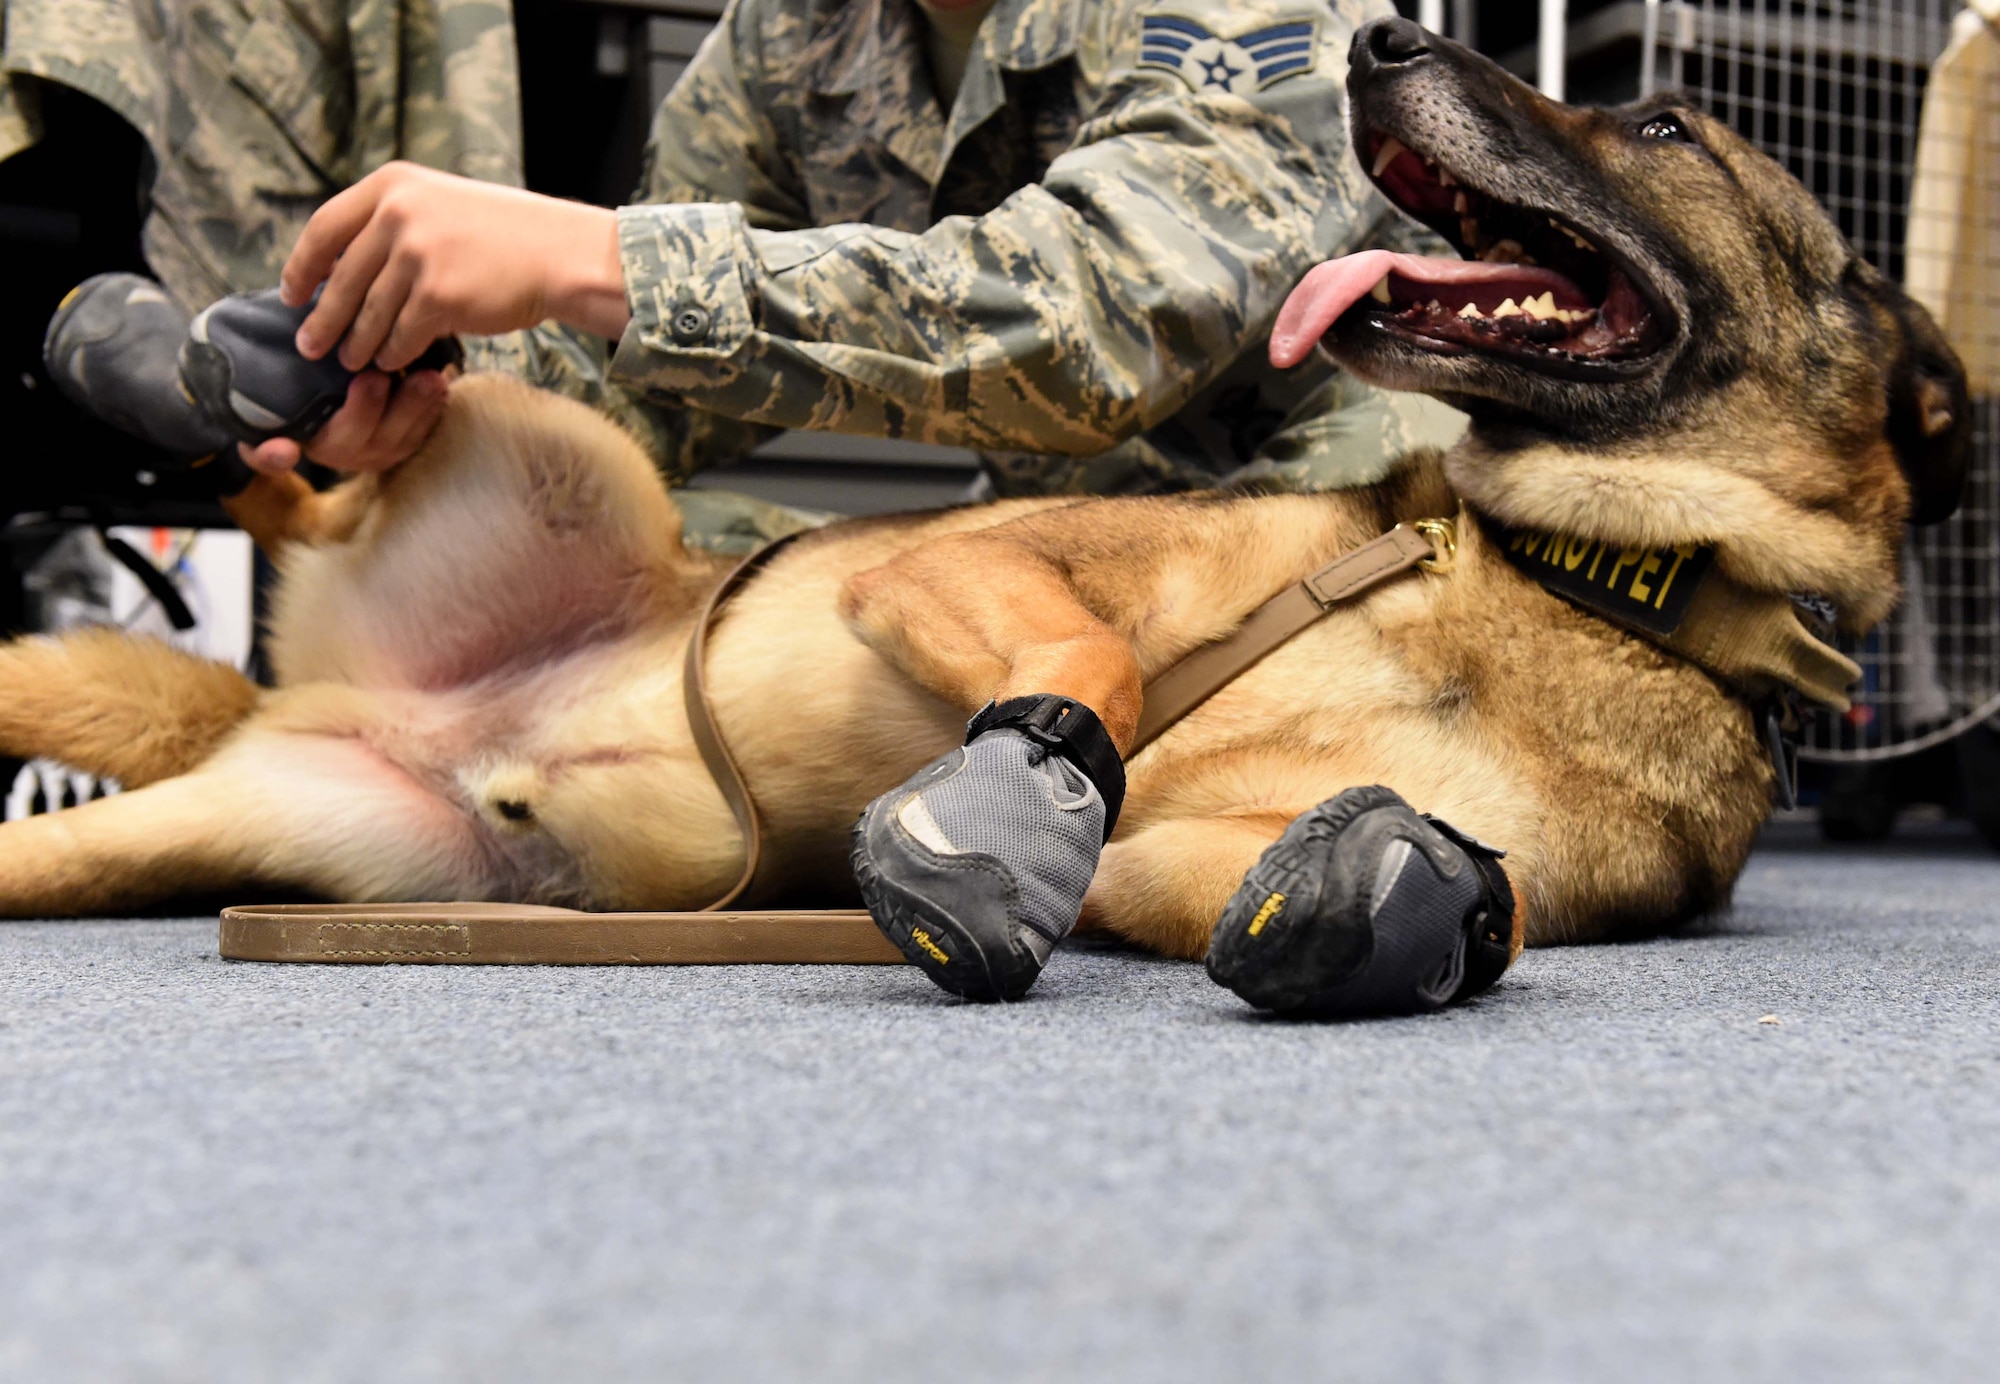 Jimy 799th Security Forces Squadron, Military working dog, get dog booties placed on his paws on Sept 1, 2017 at Creech Air Force Base, Nev.  The 799th SFS dog handlers use these booties during inclement weather conditions and harsh terrain to protect the dog’s paws. (U.S. Air Force photo by Airman 1st Class Adarius Petty)